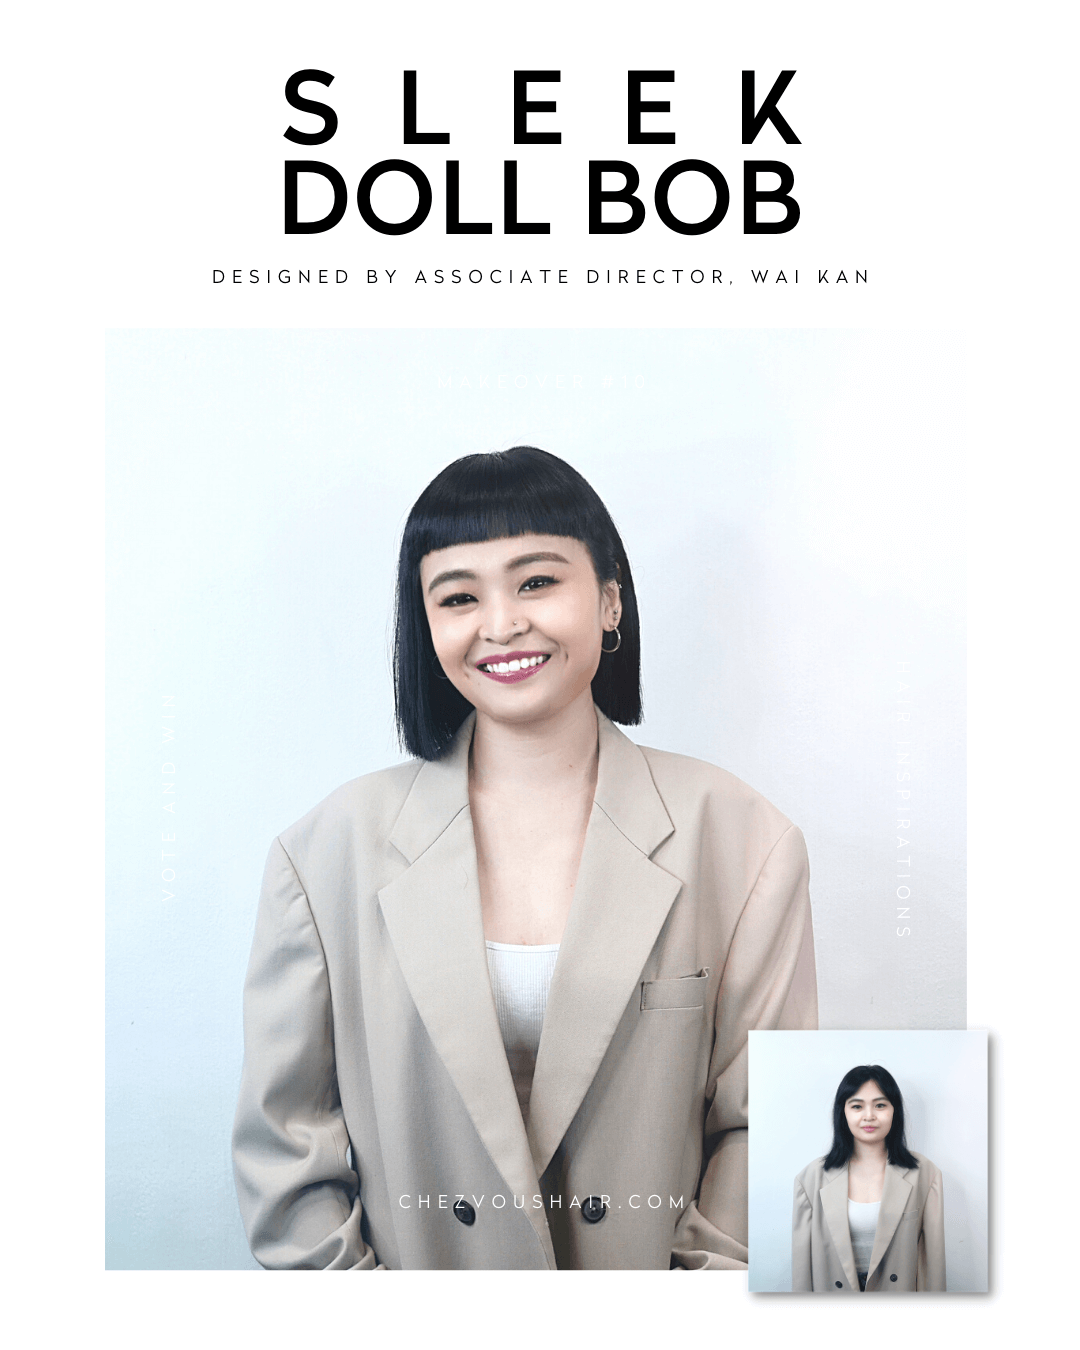 Best Short Haircuts & Medium-Length Hairstyles Trend #7: Sleek Doll Bob Hairstyle | Designed by Associate Director of Chez Vous Hair Salon, Wai Kan | Services: Roots Retouch, Haircut